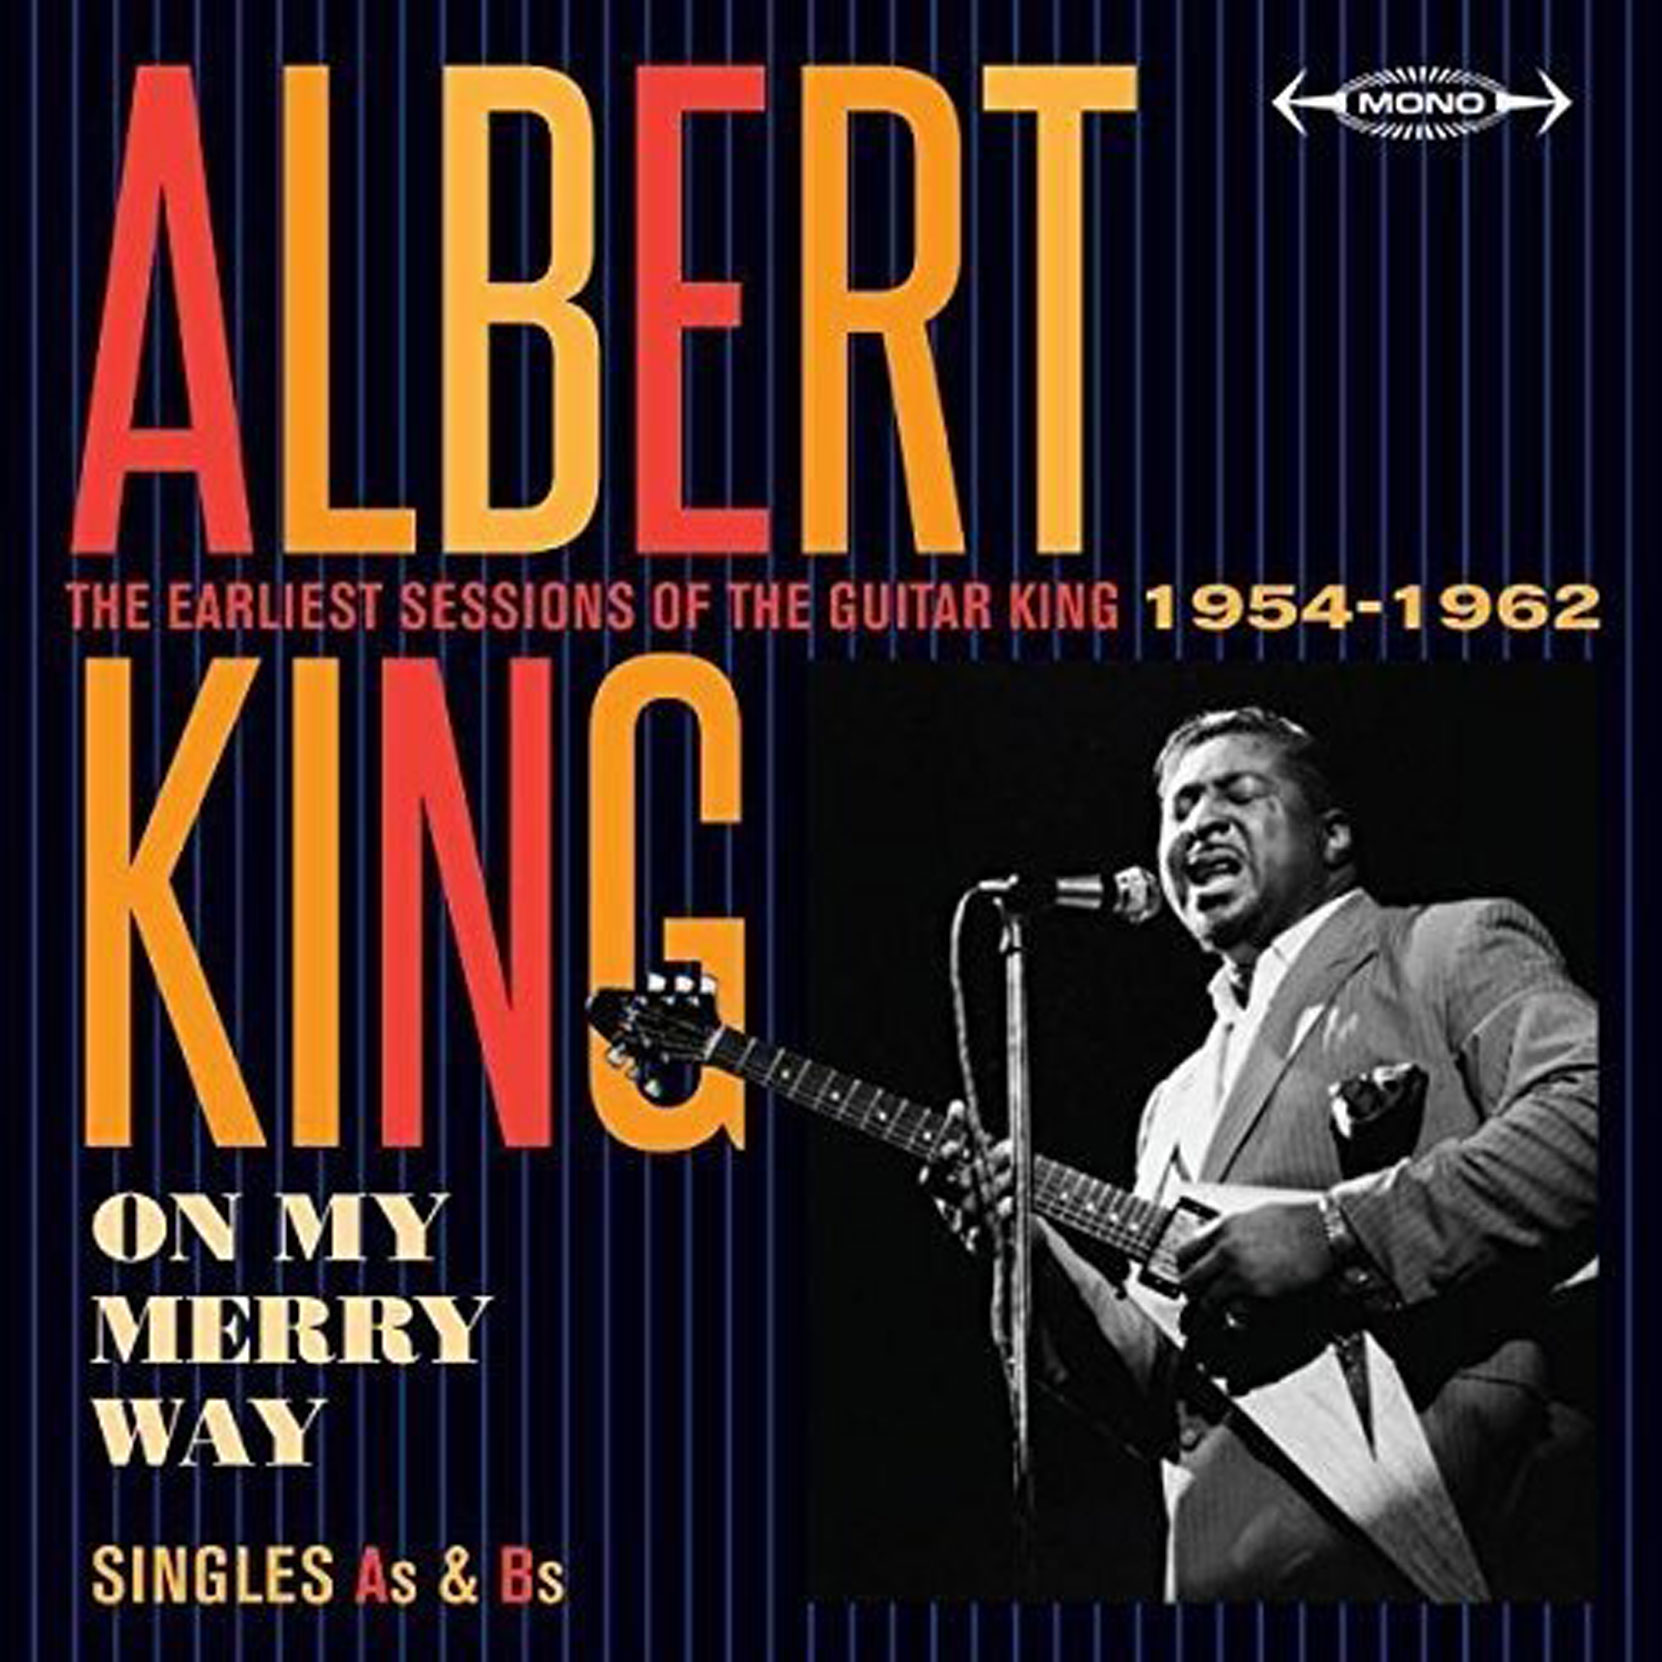 Albert King - On My Merry Way - Singles A's & B's 1954-1962, released on Jasmine Records. CD cover.